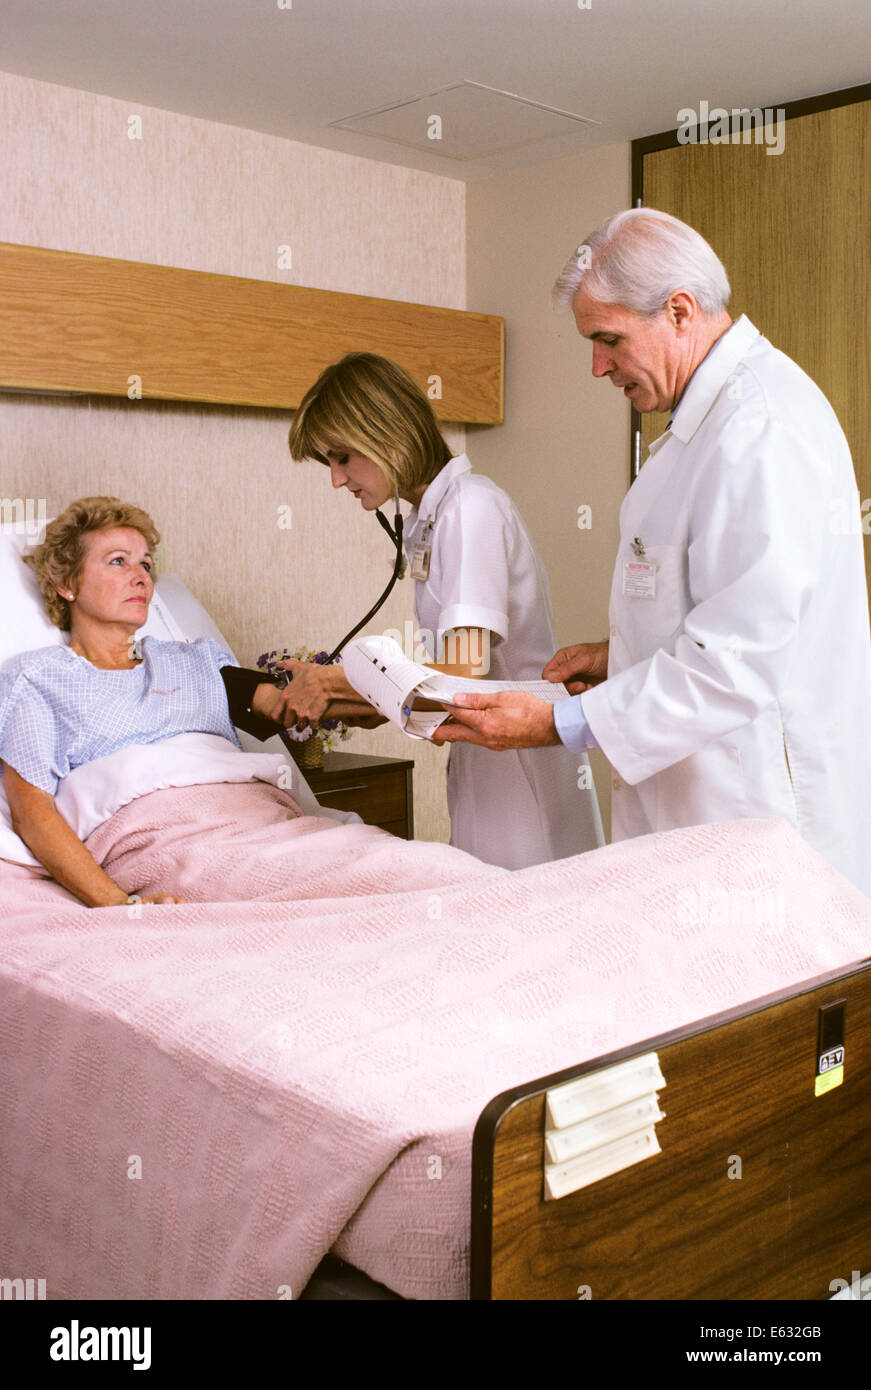 MATURE FEMALE PATIENT IN HOSPITAL BED NURSE AND DOCTOR TAKING VITALS VISITING Stock Photo